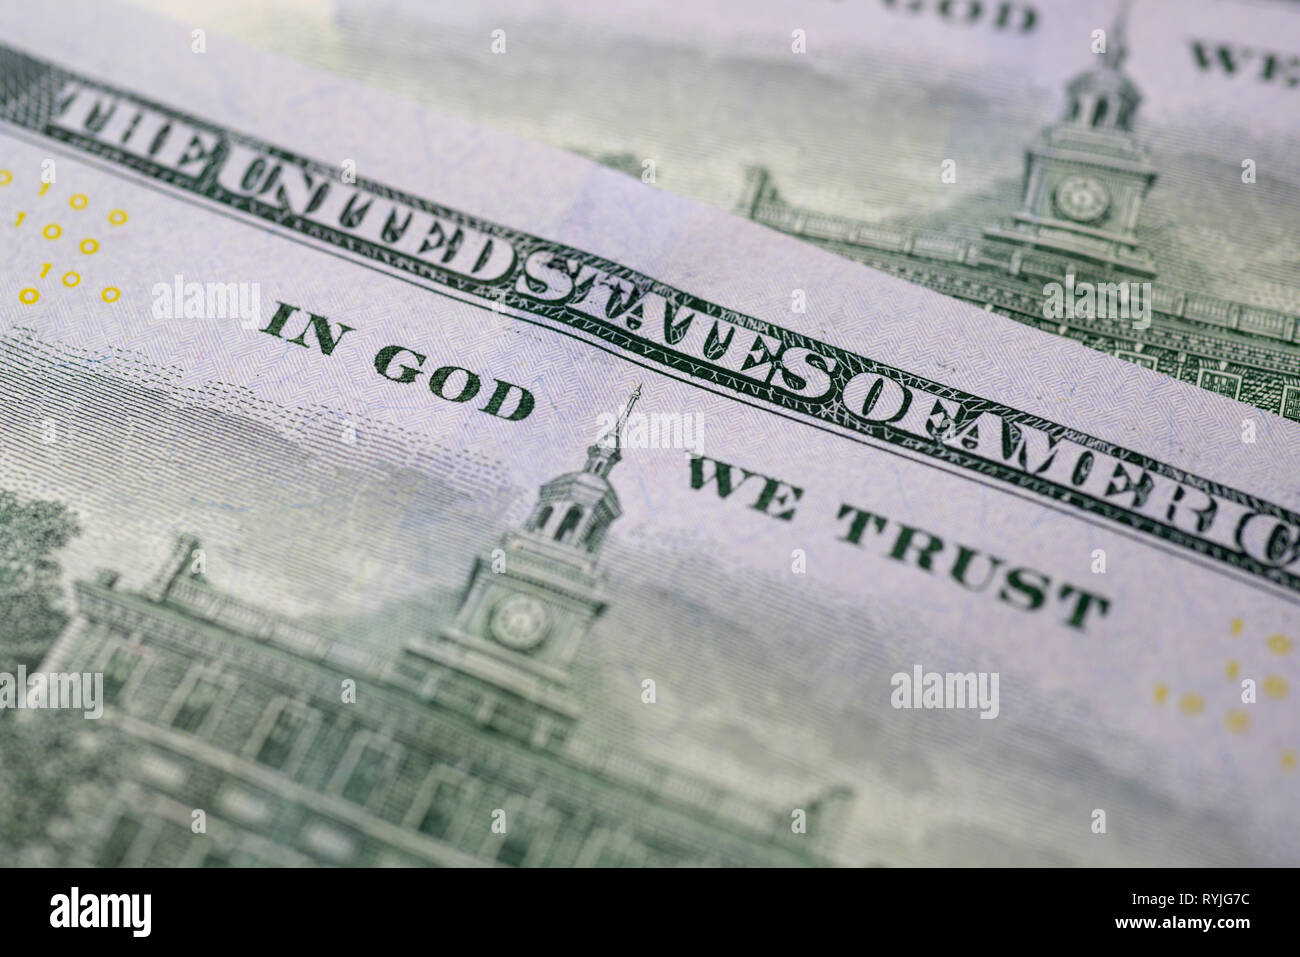 us currency one hundred dollar bills in God we trust sign Stock Photo